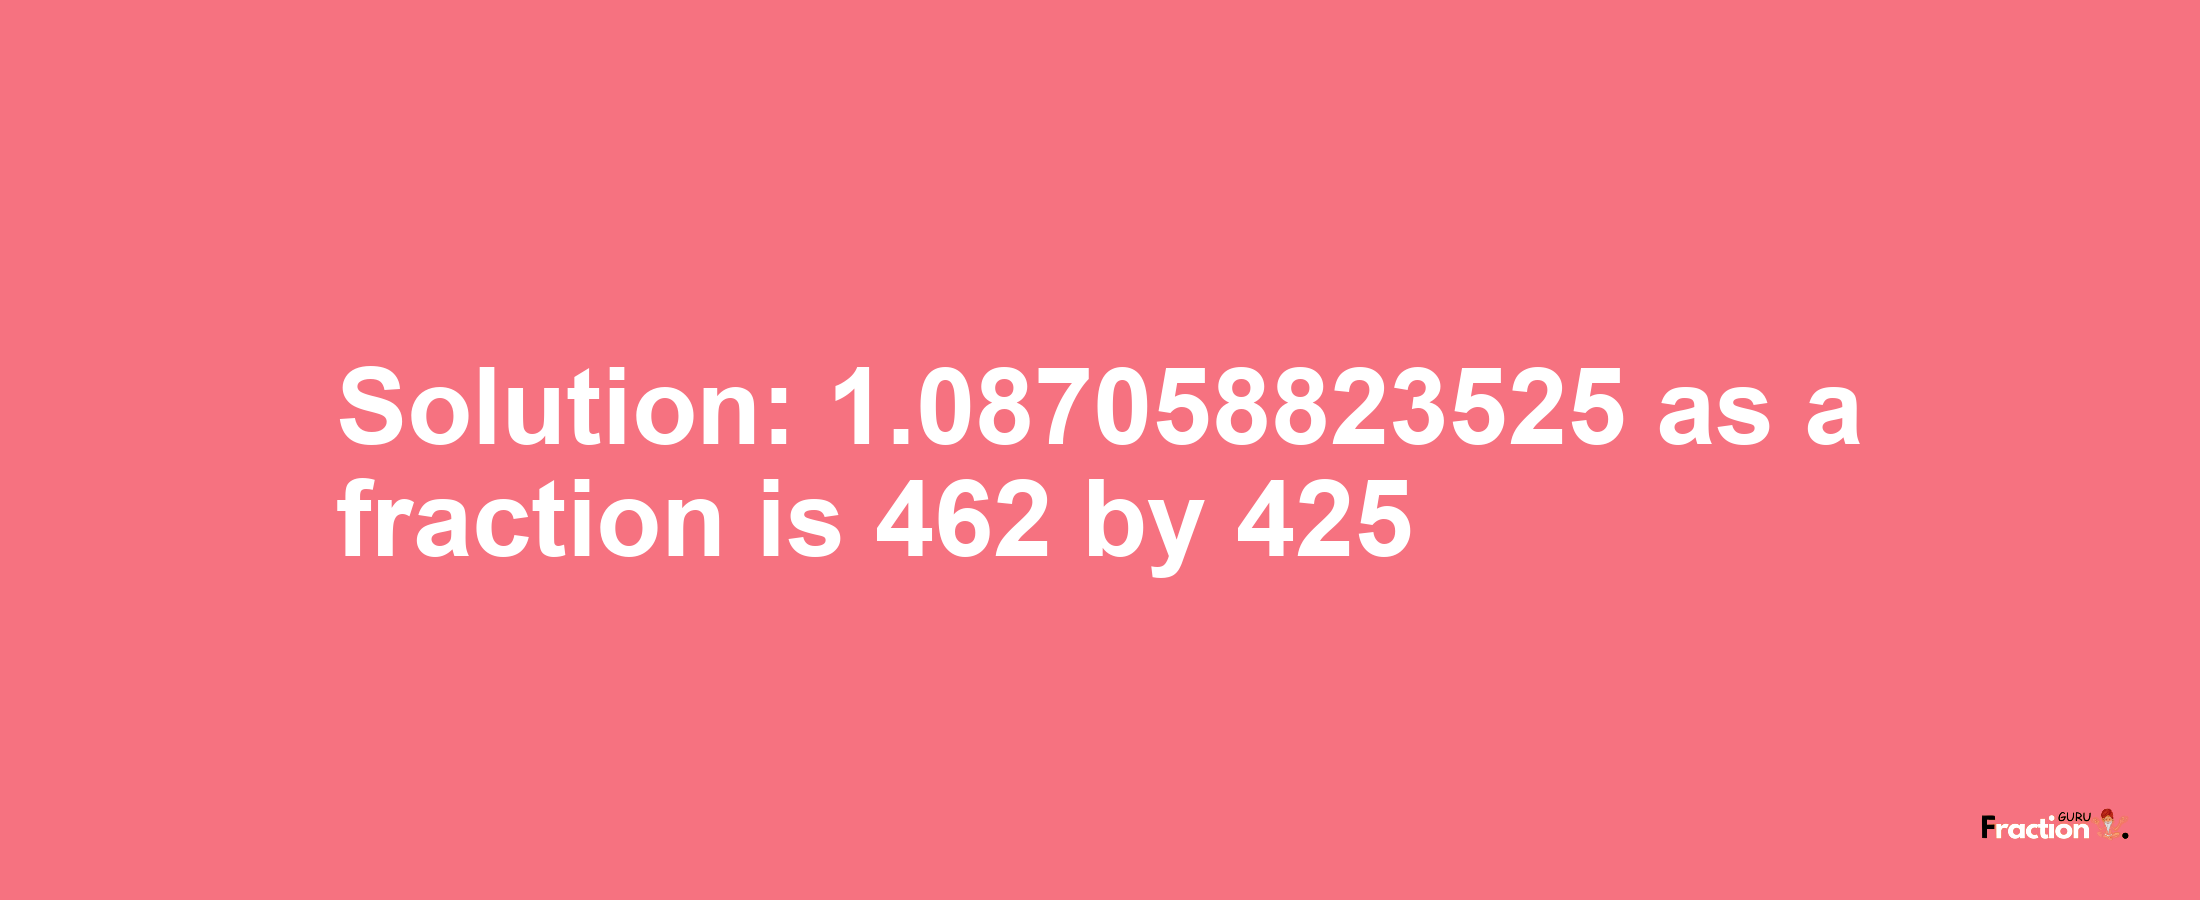 Solution:1.087058823525 as a fraction is 462/425